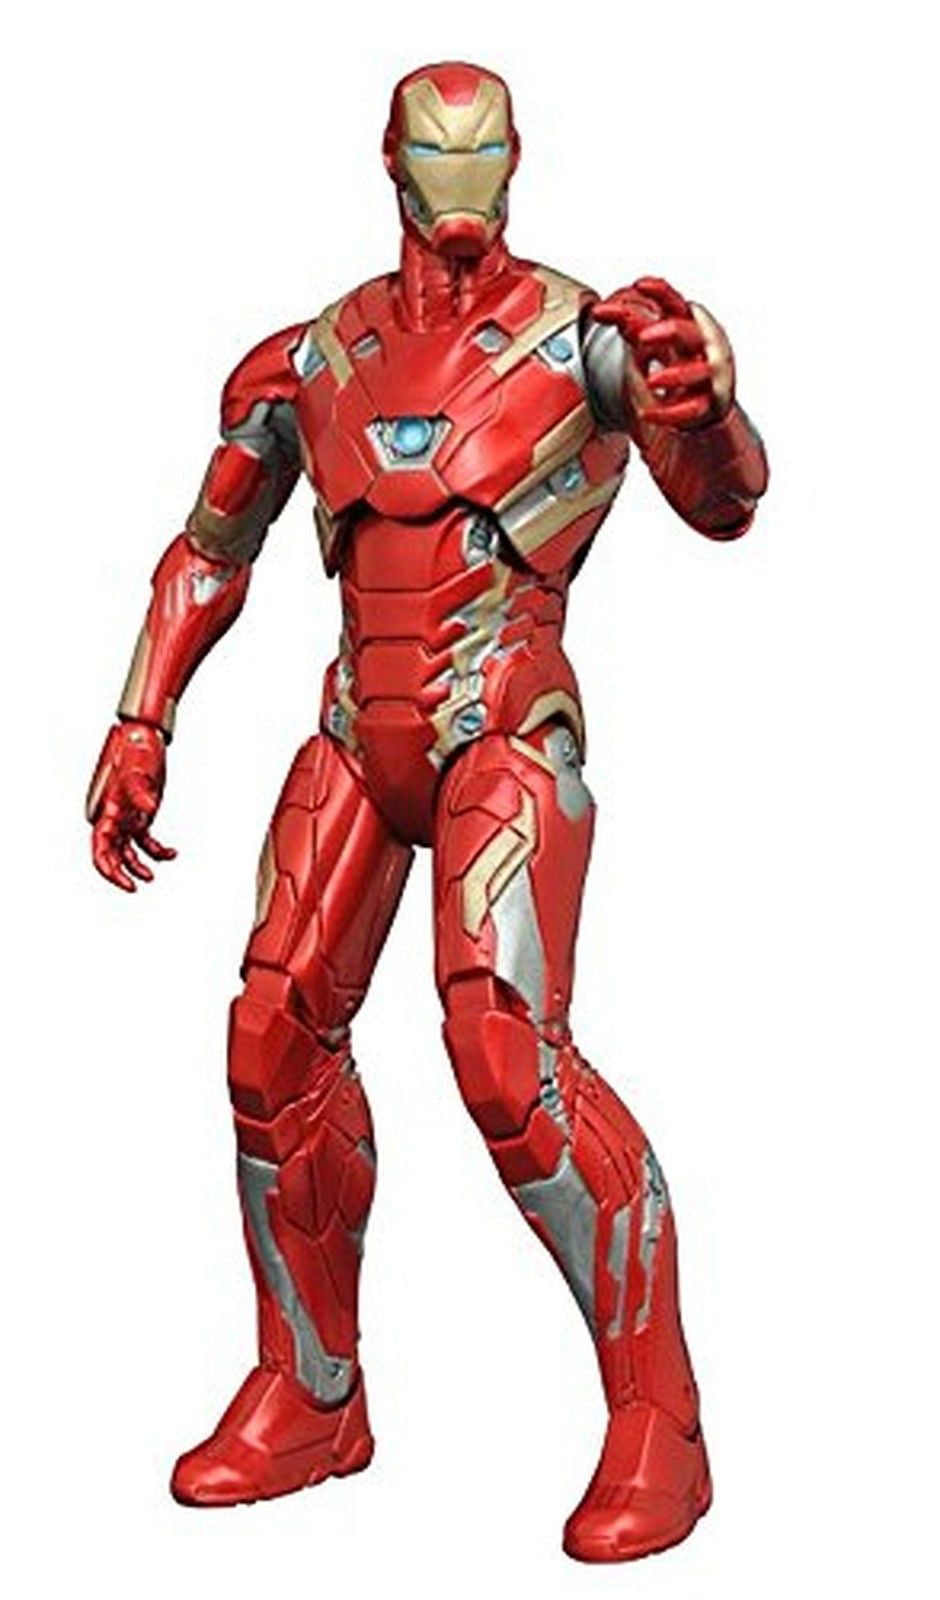 COLLECTS YOU MARVEL NECA CAPTAIN AMERICA CIVIL WAR 2 INCH SCALERS FIGURE 